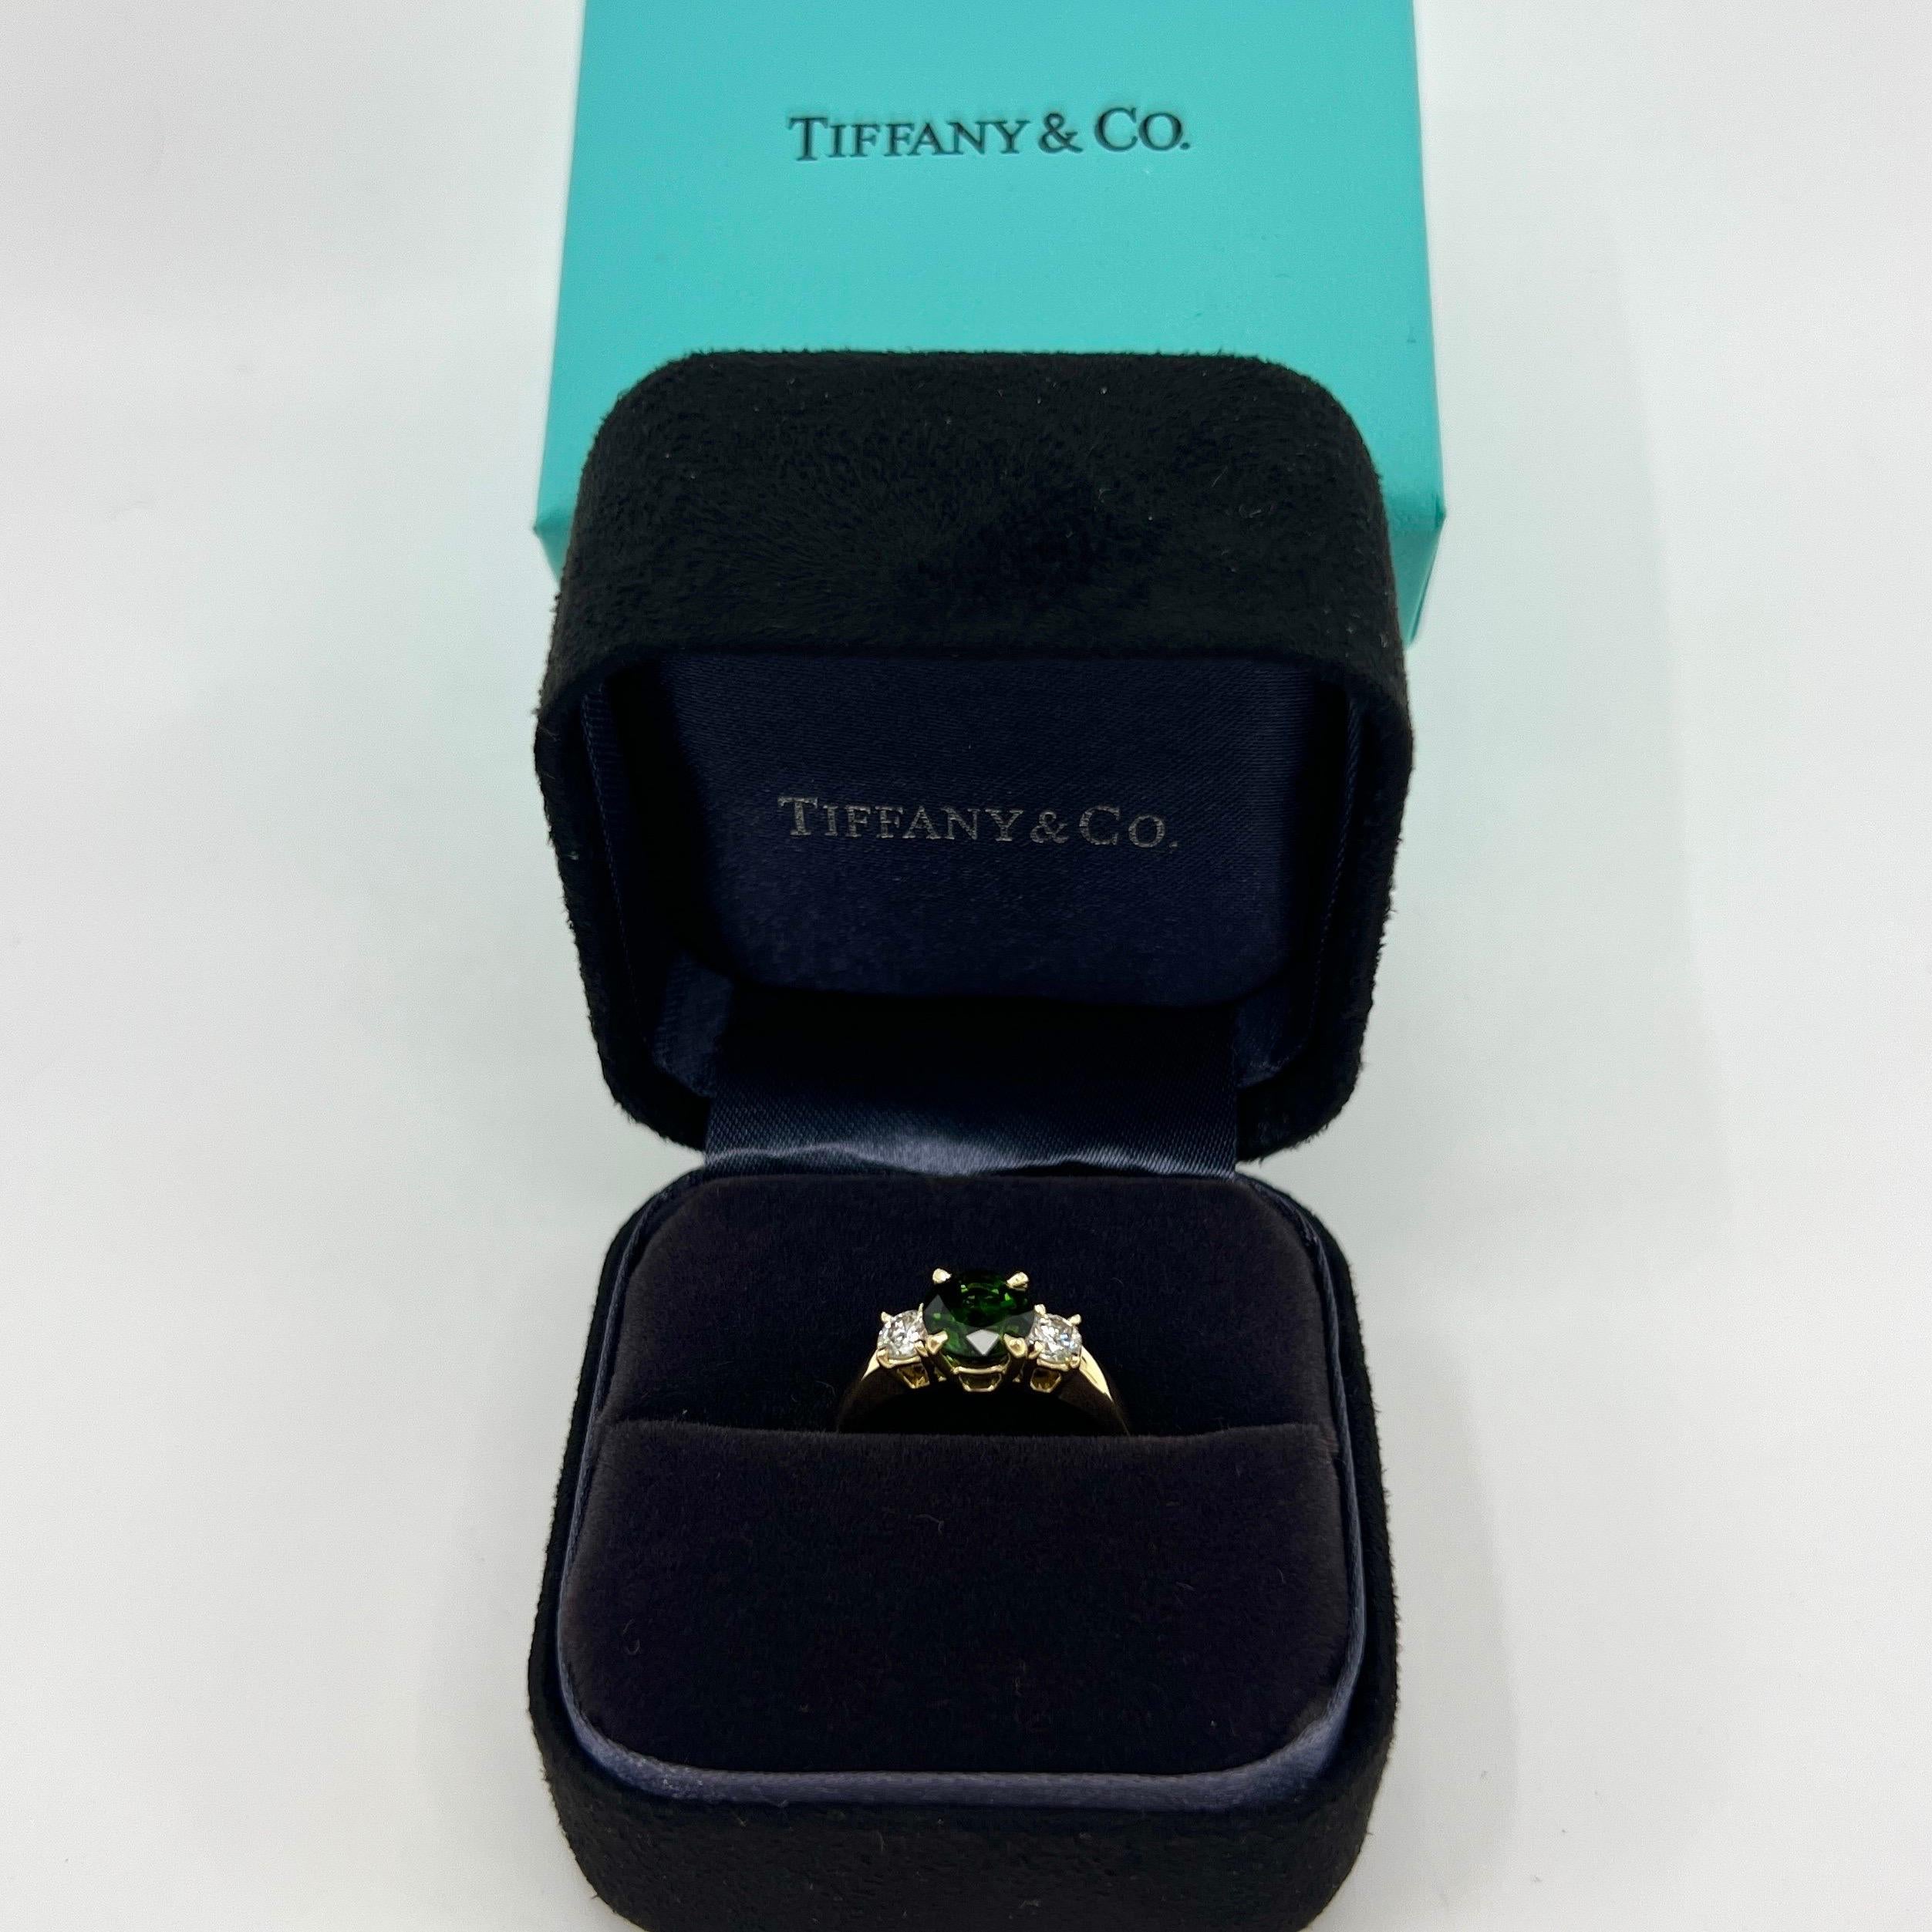 Vintage Tiffany & Co Round Cut Green Tourmaline And Diamond 18k Yellow Gold Three Stone Ring.

Fine jewellery houses like Tiffany only use the finest diamonds and gemstones in their jewellery and this piece is no exception. A top quality 6.5mm round